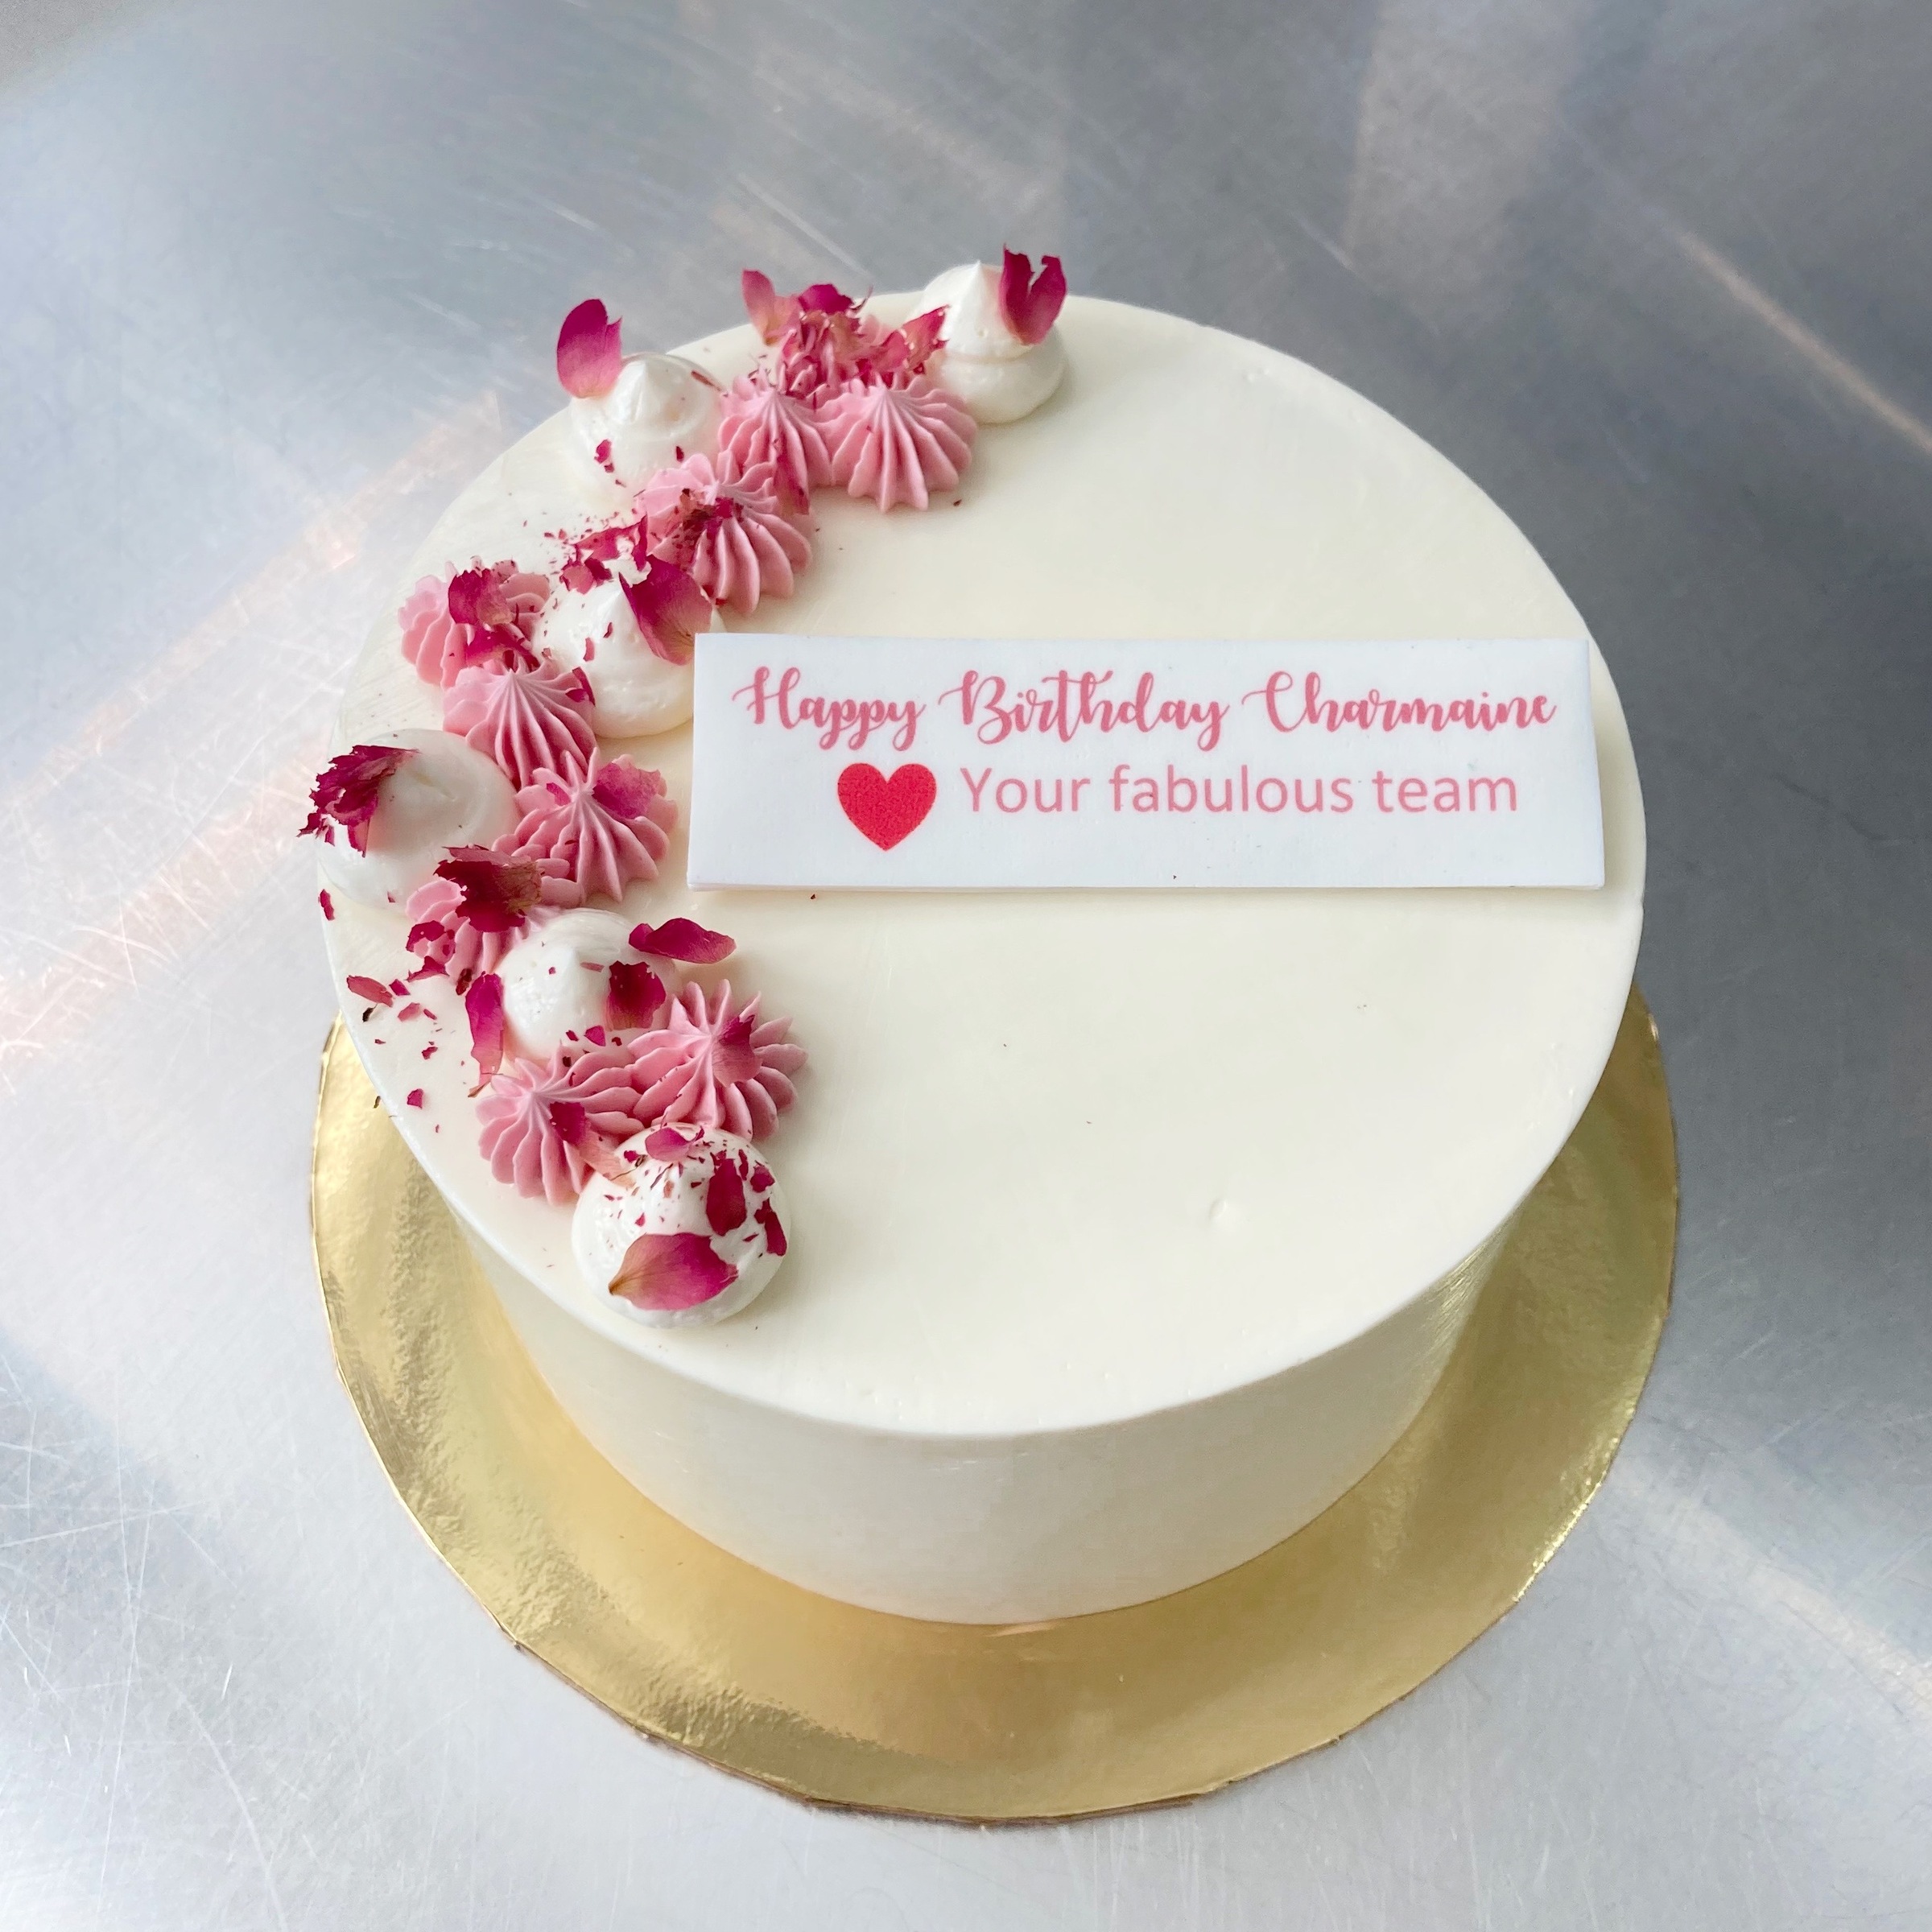 Birthday Cakes made with your favorite Ice Cream at Cold Stone Creamery